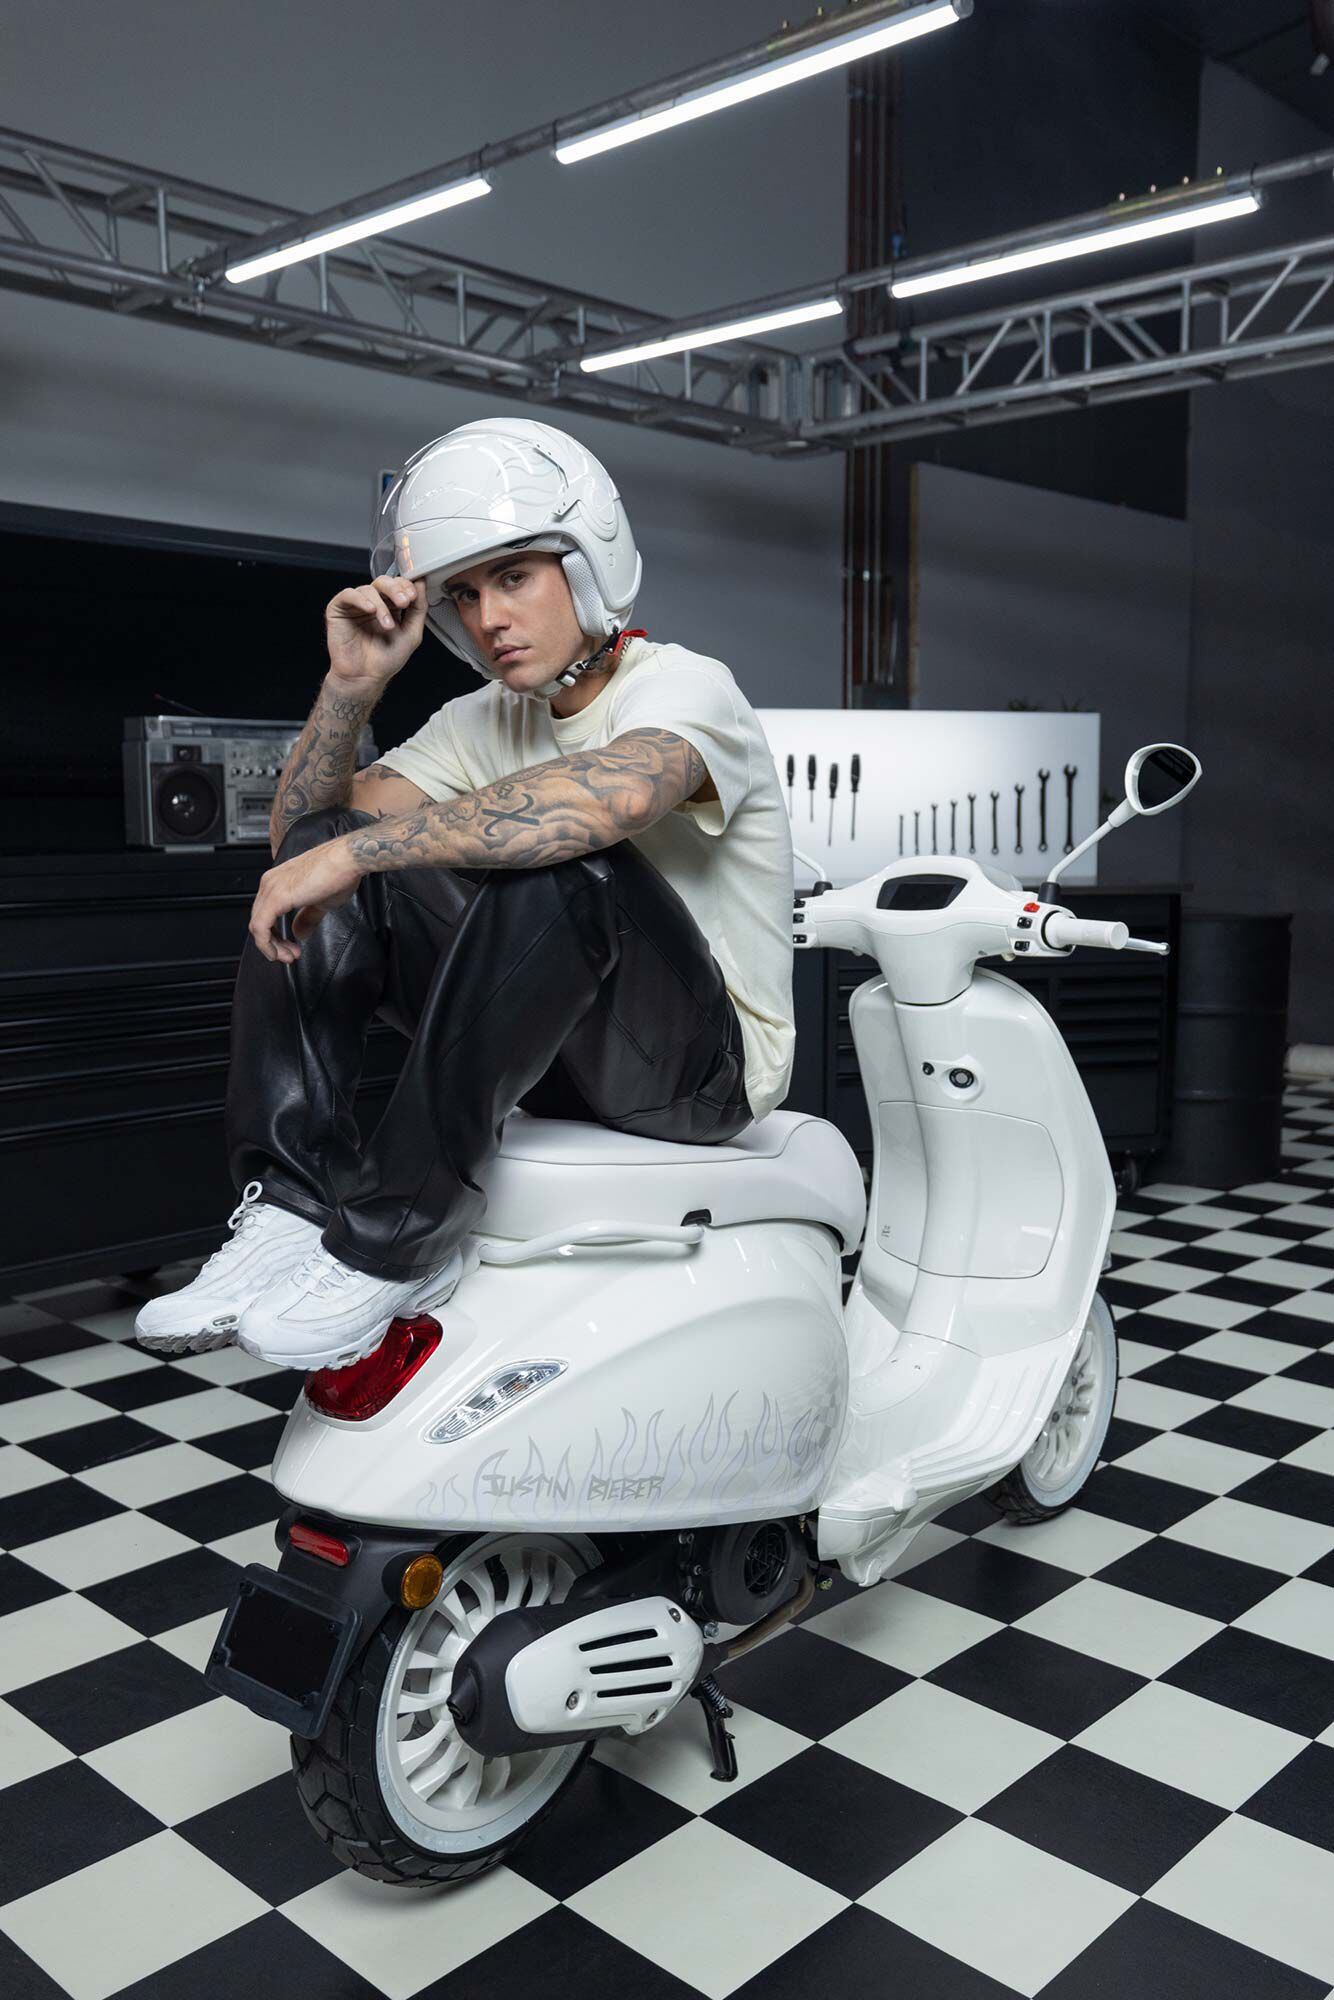 A study in white, the Justin Bieber Vespa is going to stand out and make a definite fashion statement.